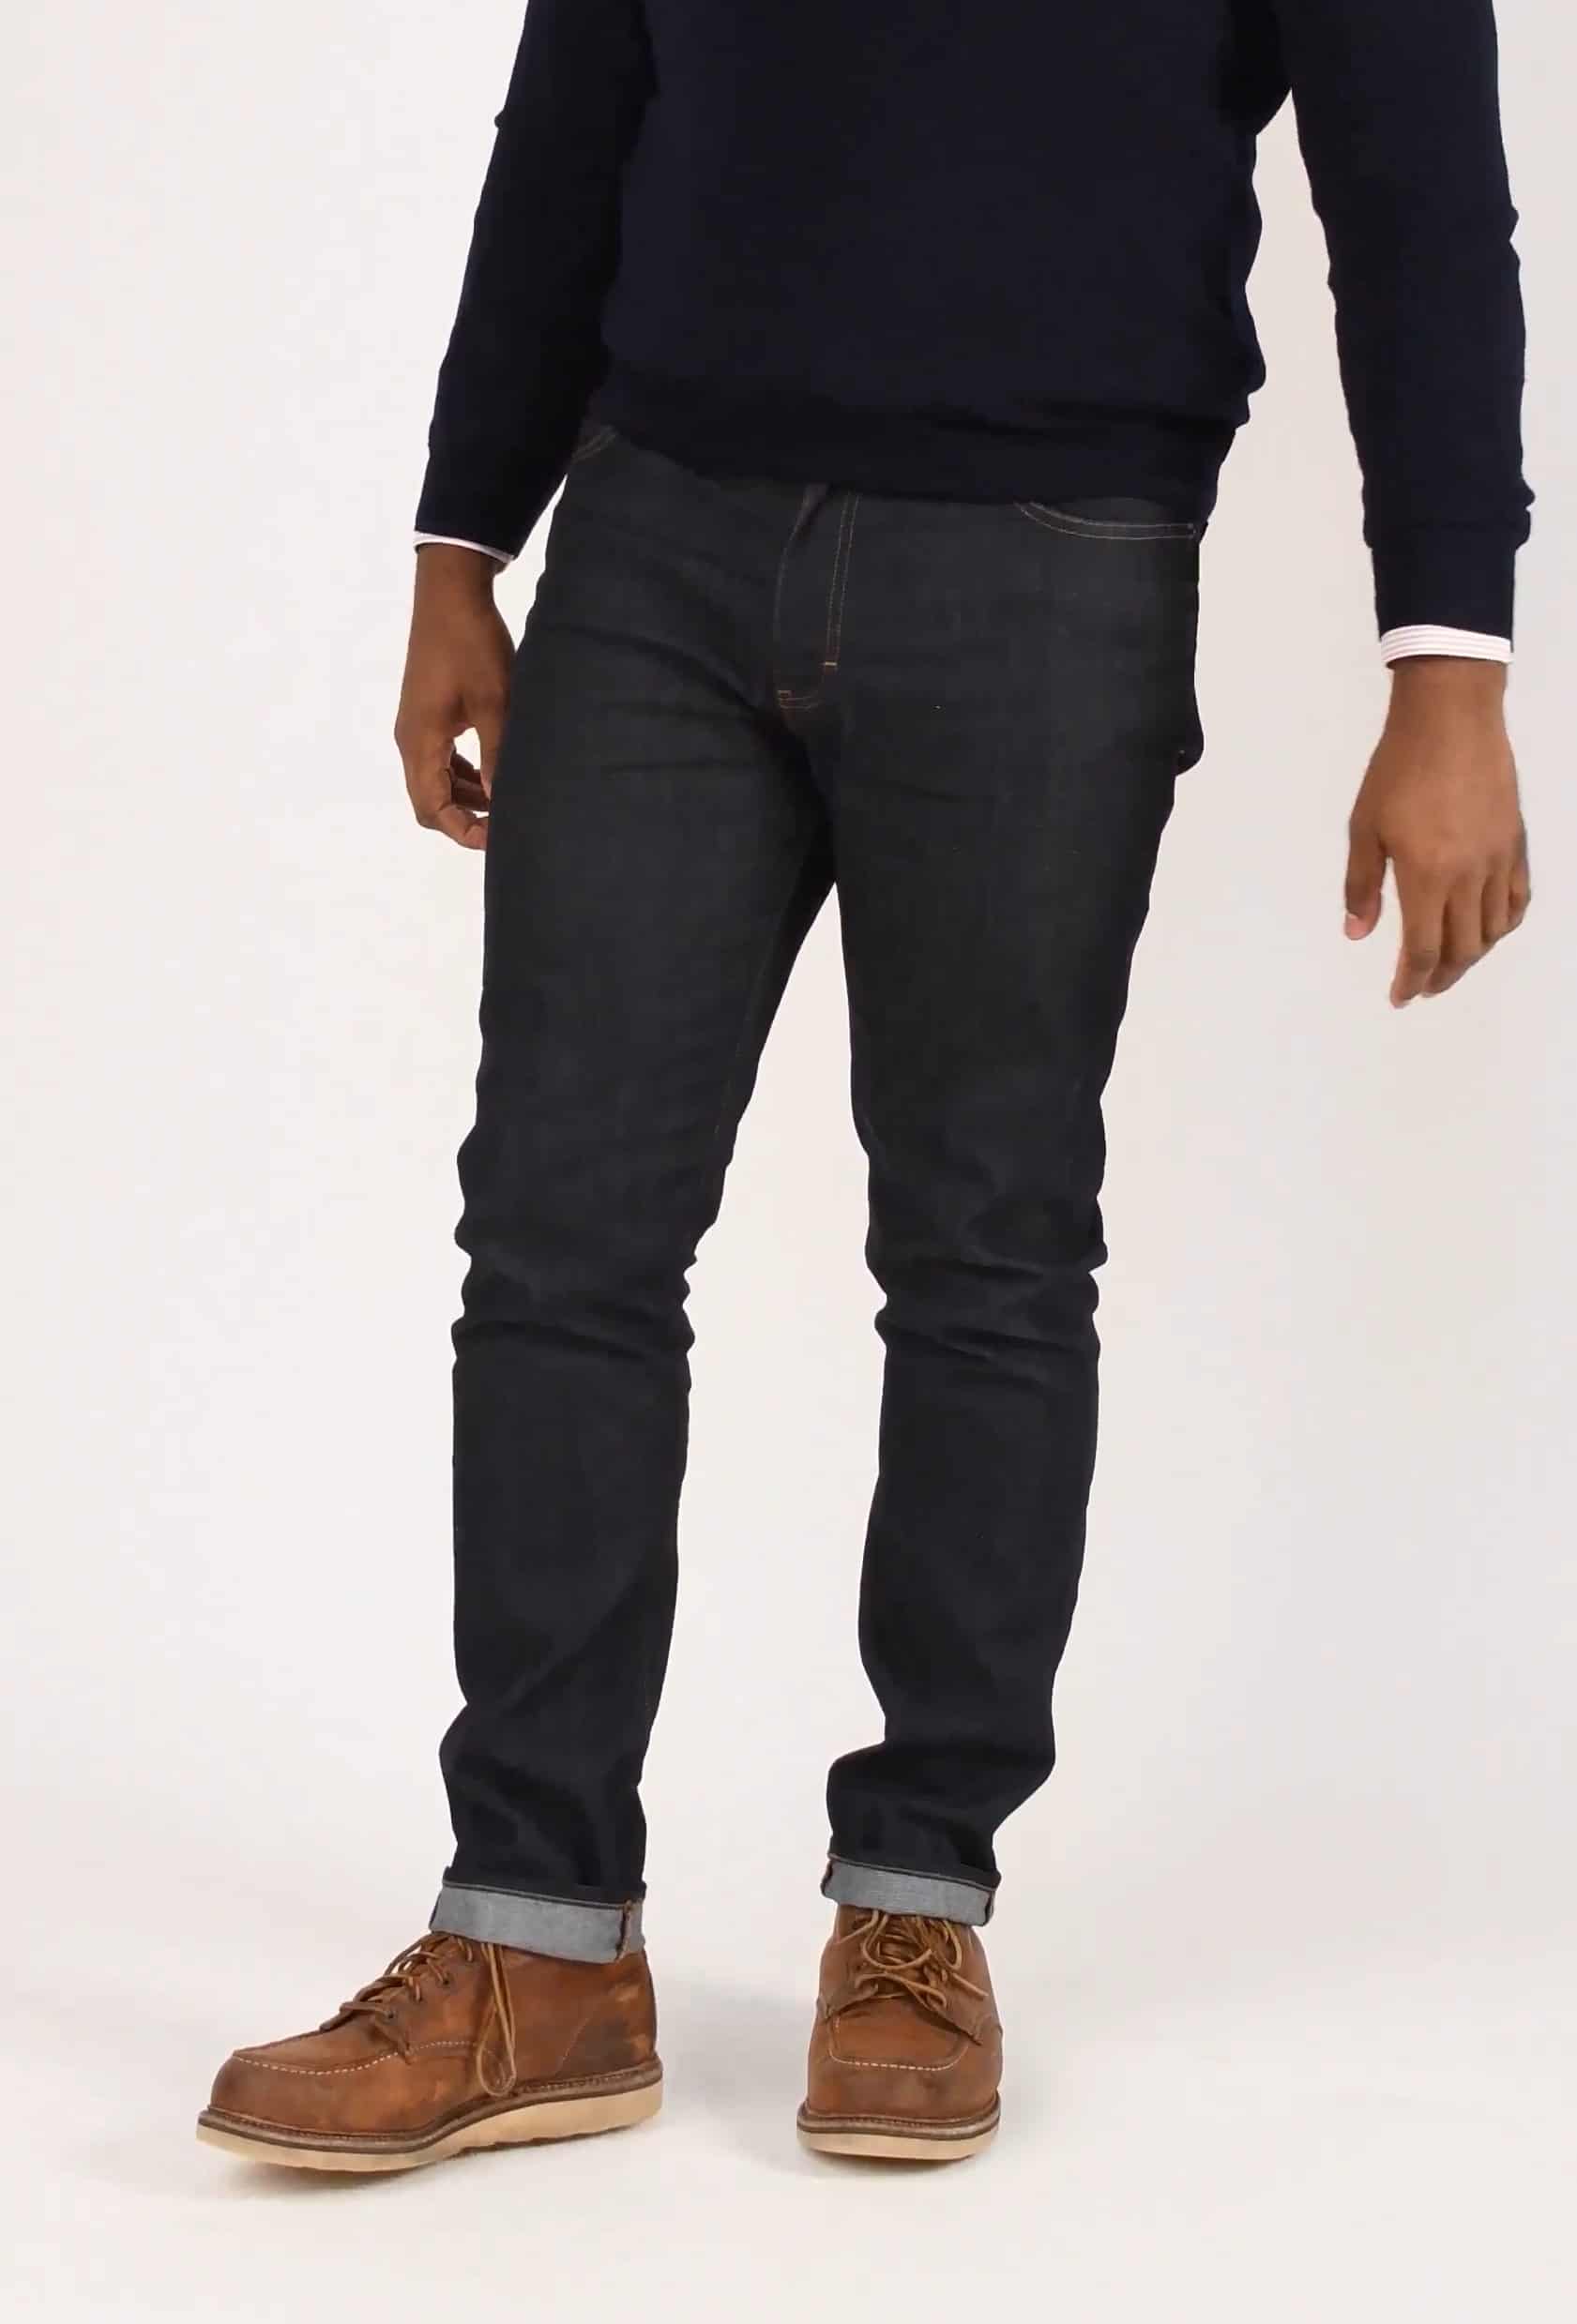 Denim and rugged boots pair nicely with casual turtleneck sweater outfits